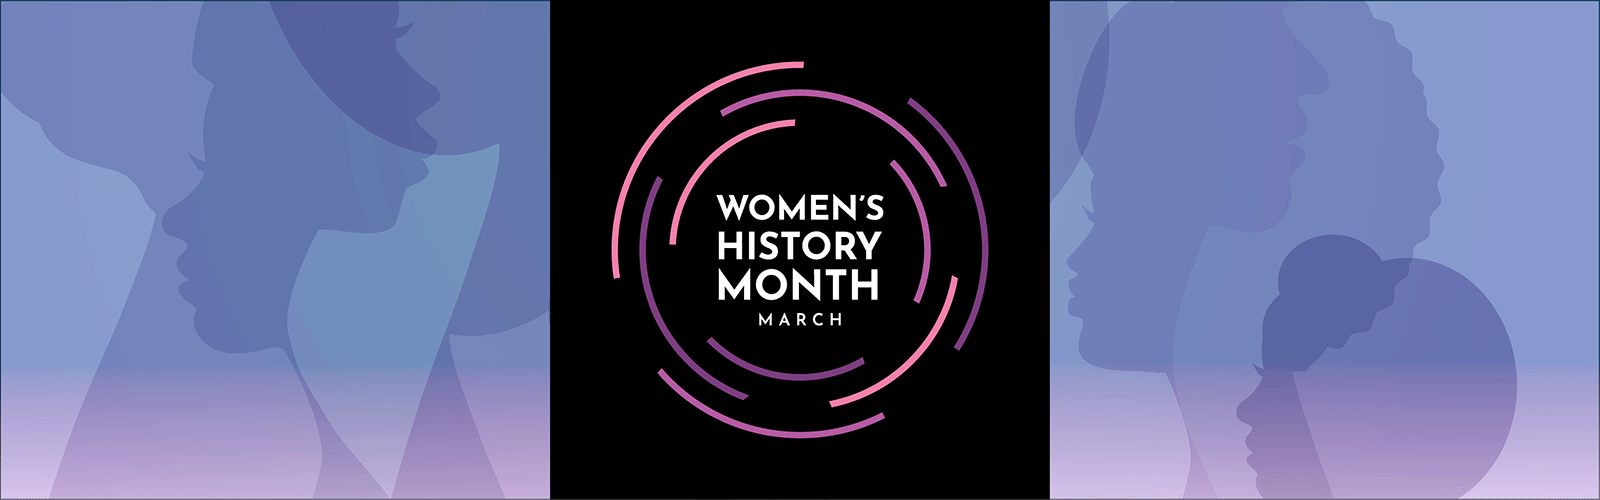 Women's History Month - March